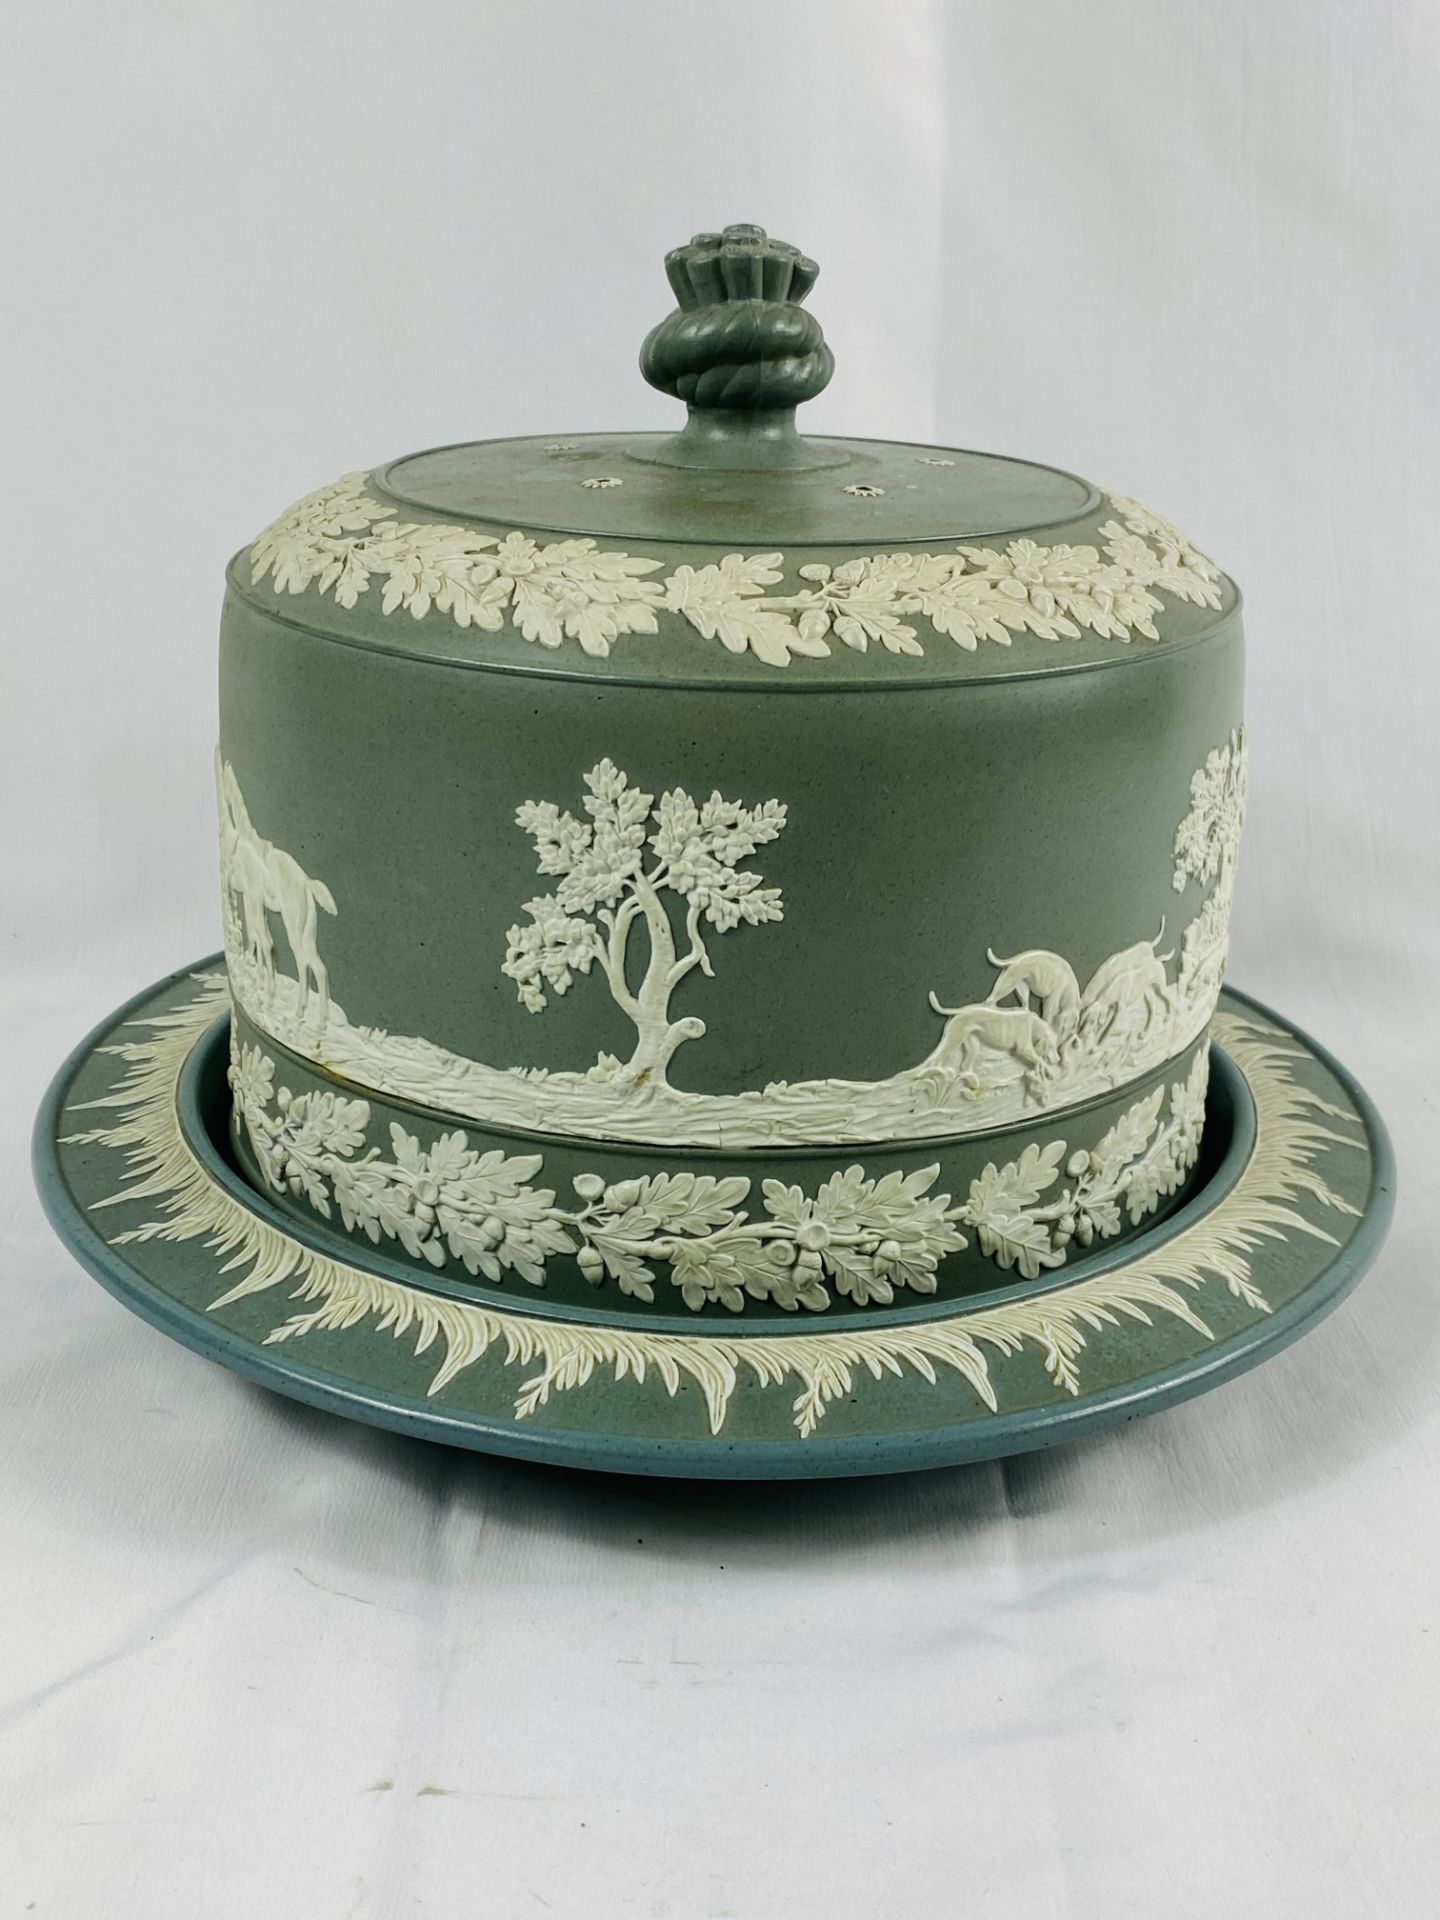 Wedgwood style cheese cloche - Image 5 of 7